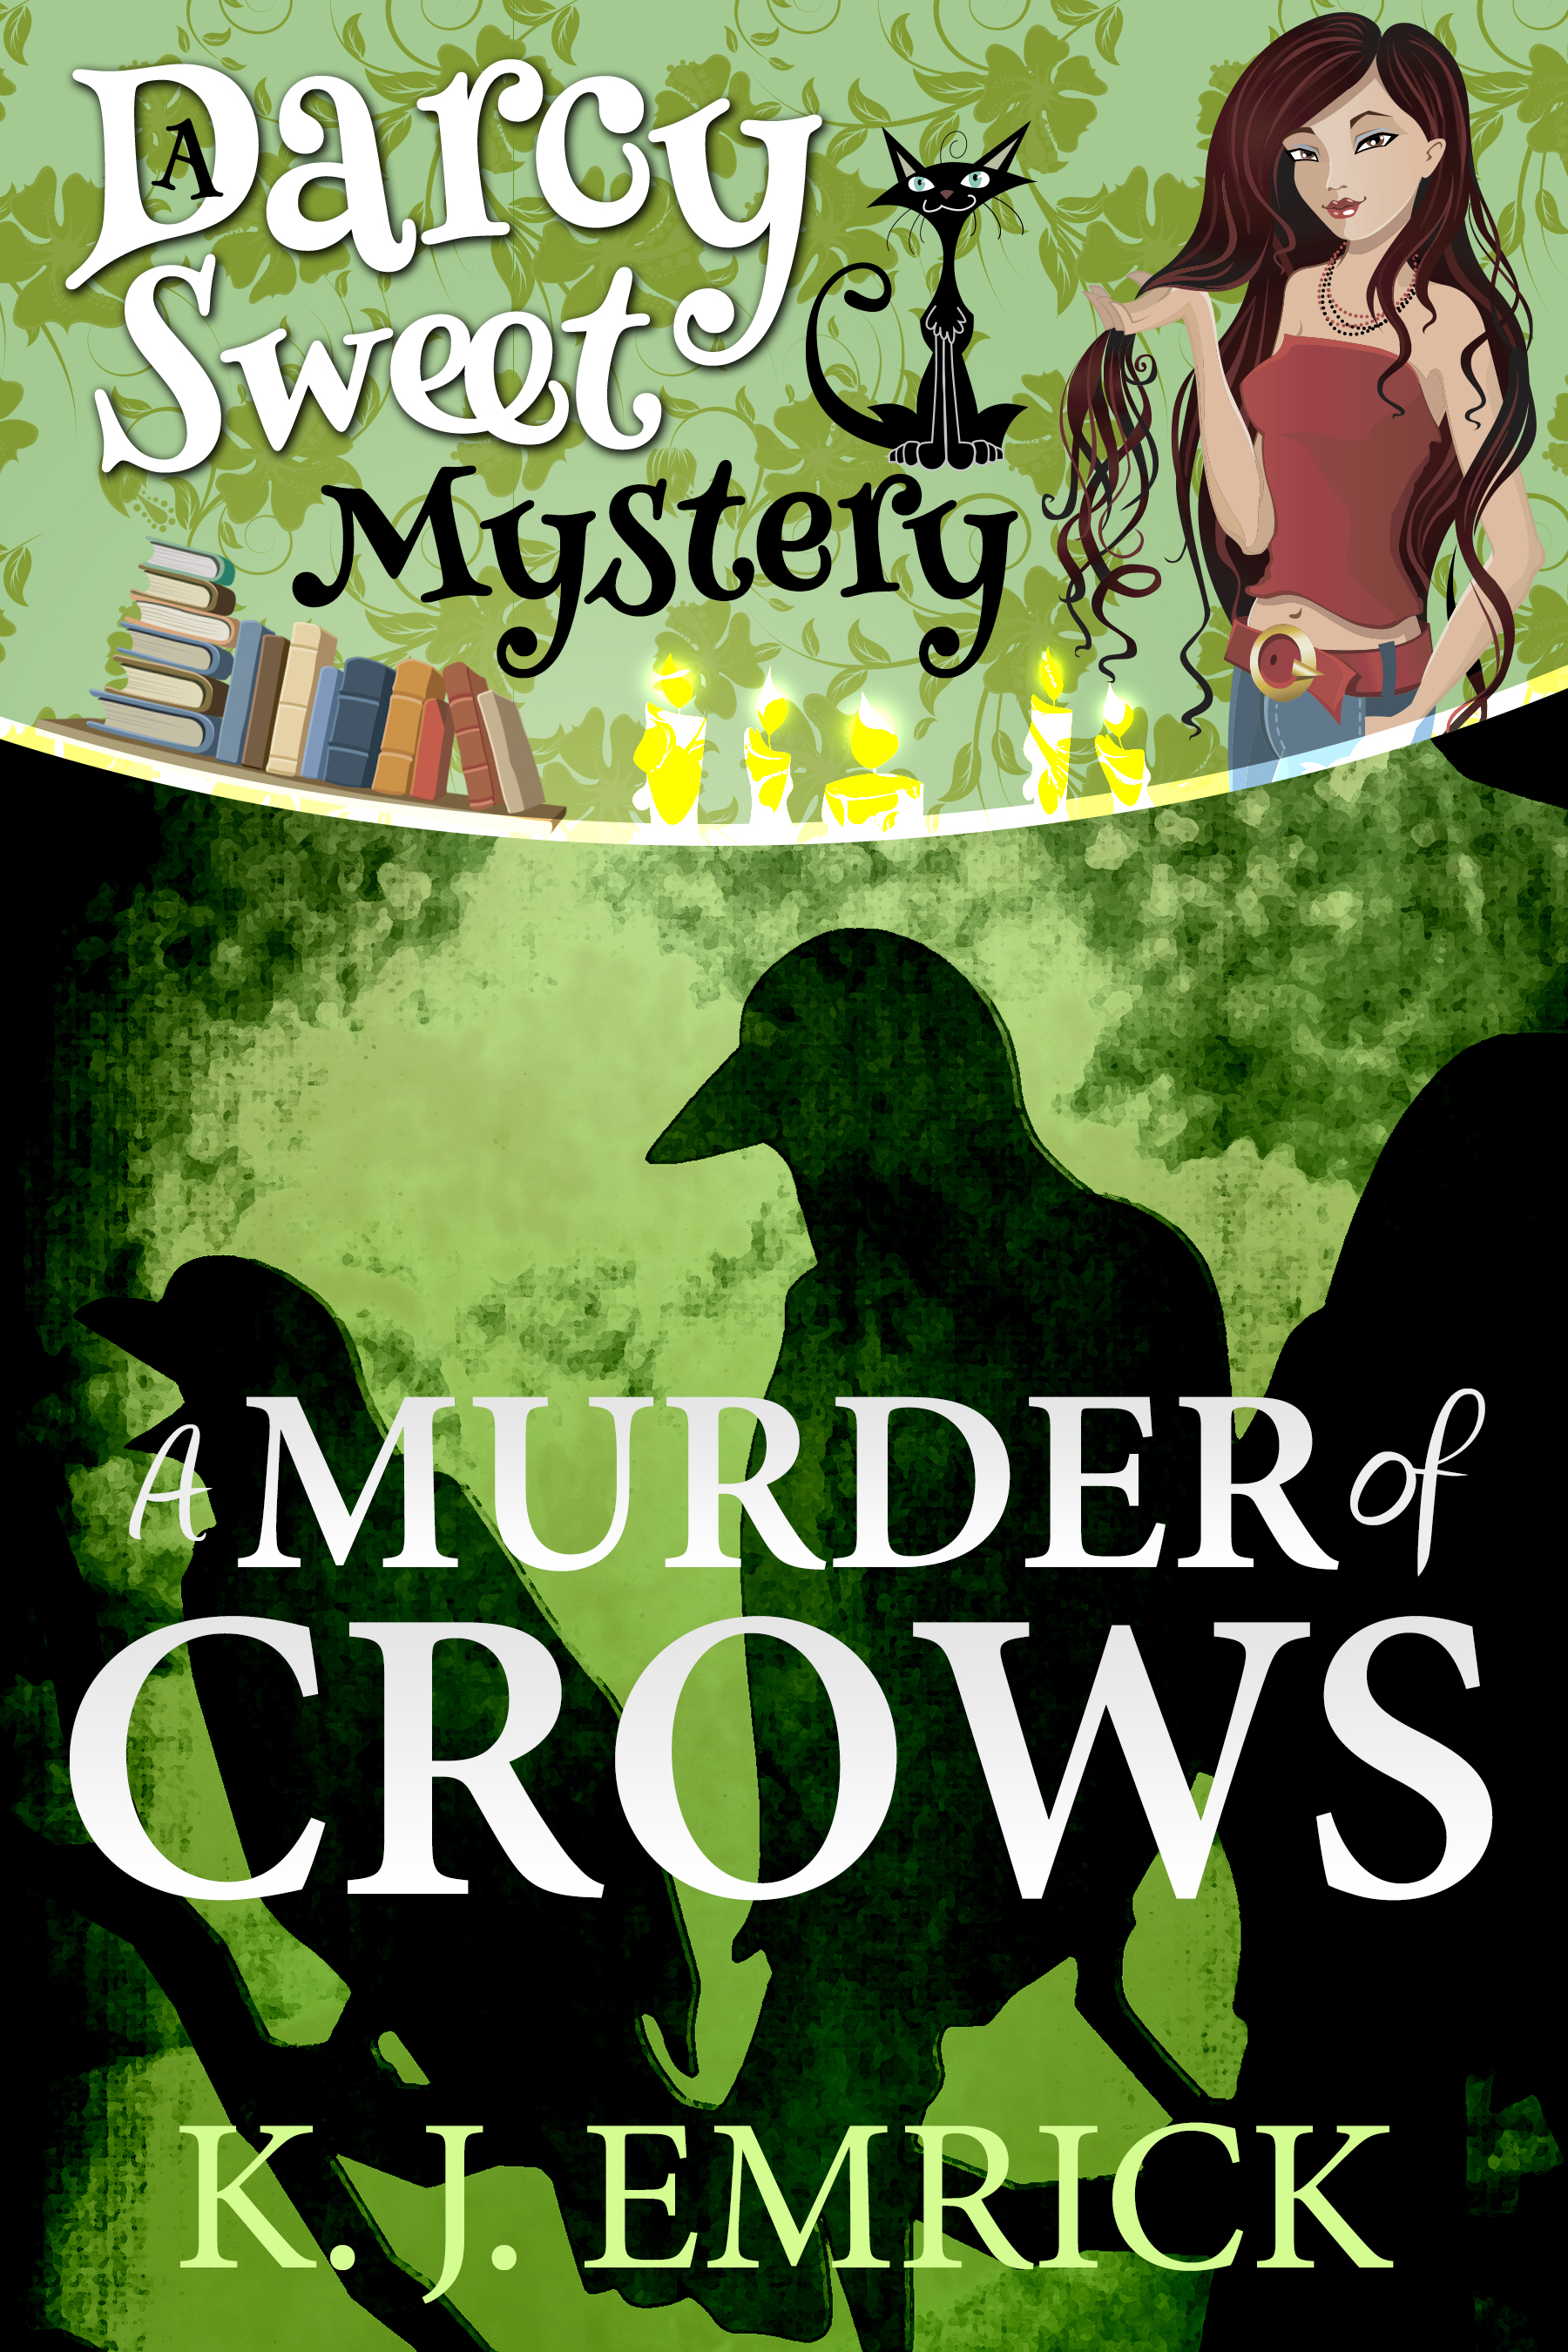 A Murder of Crows - A Darcy Sweet Mystery